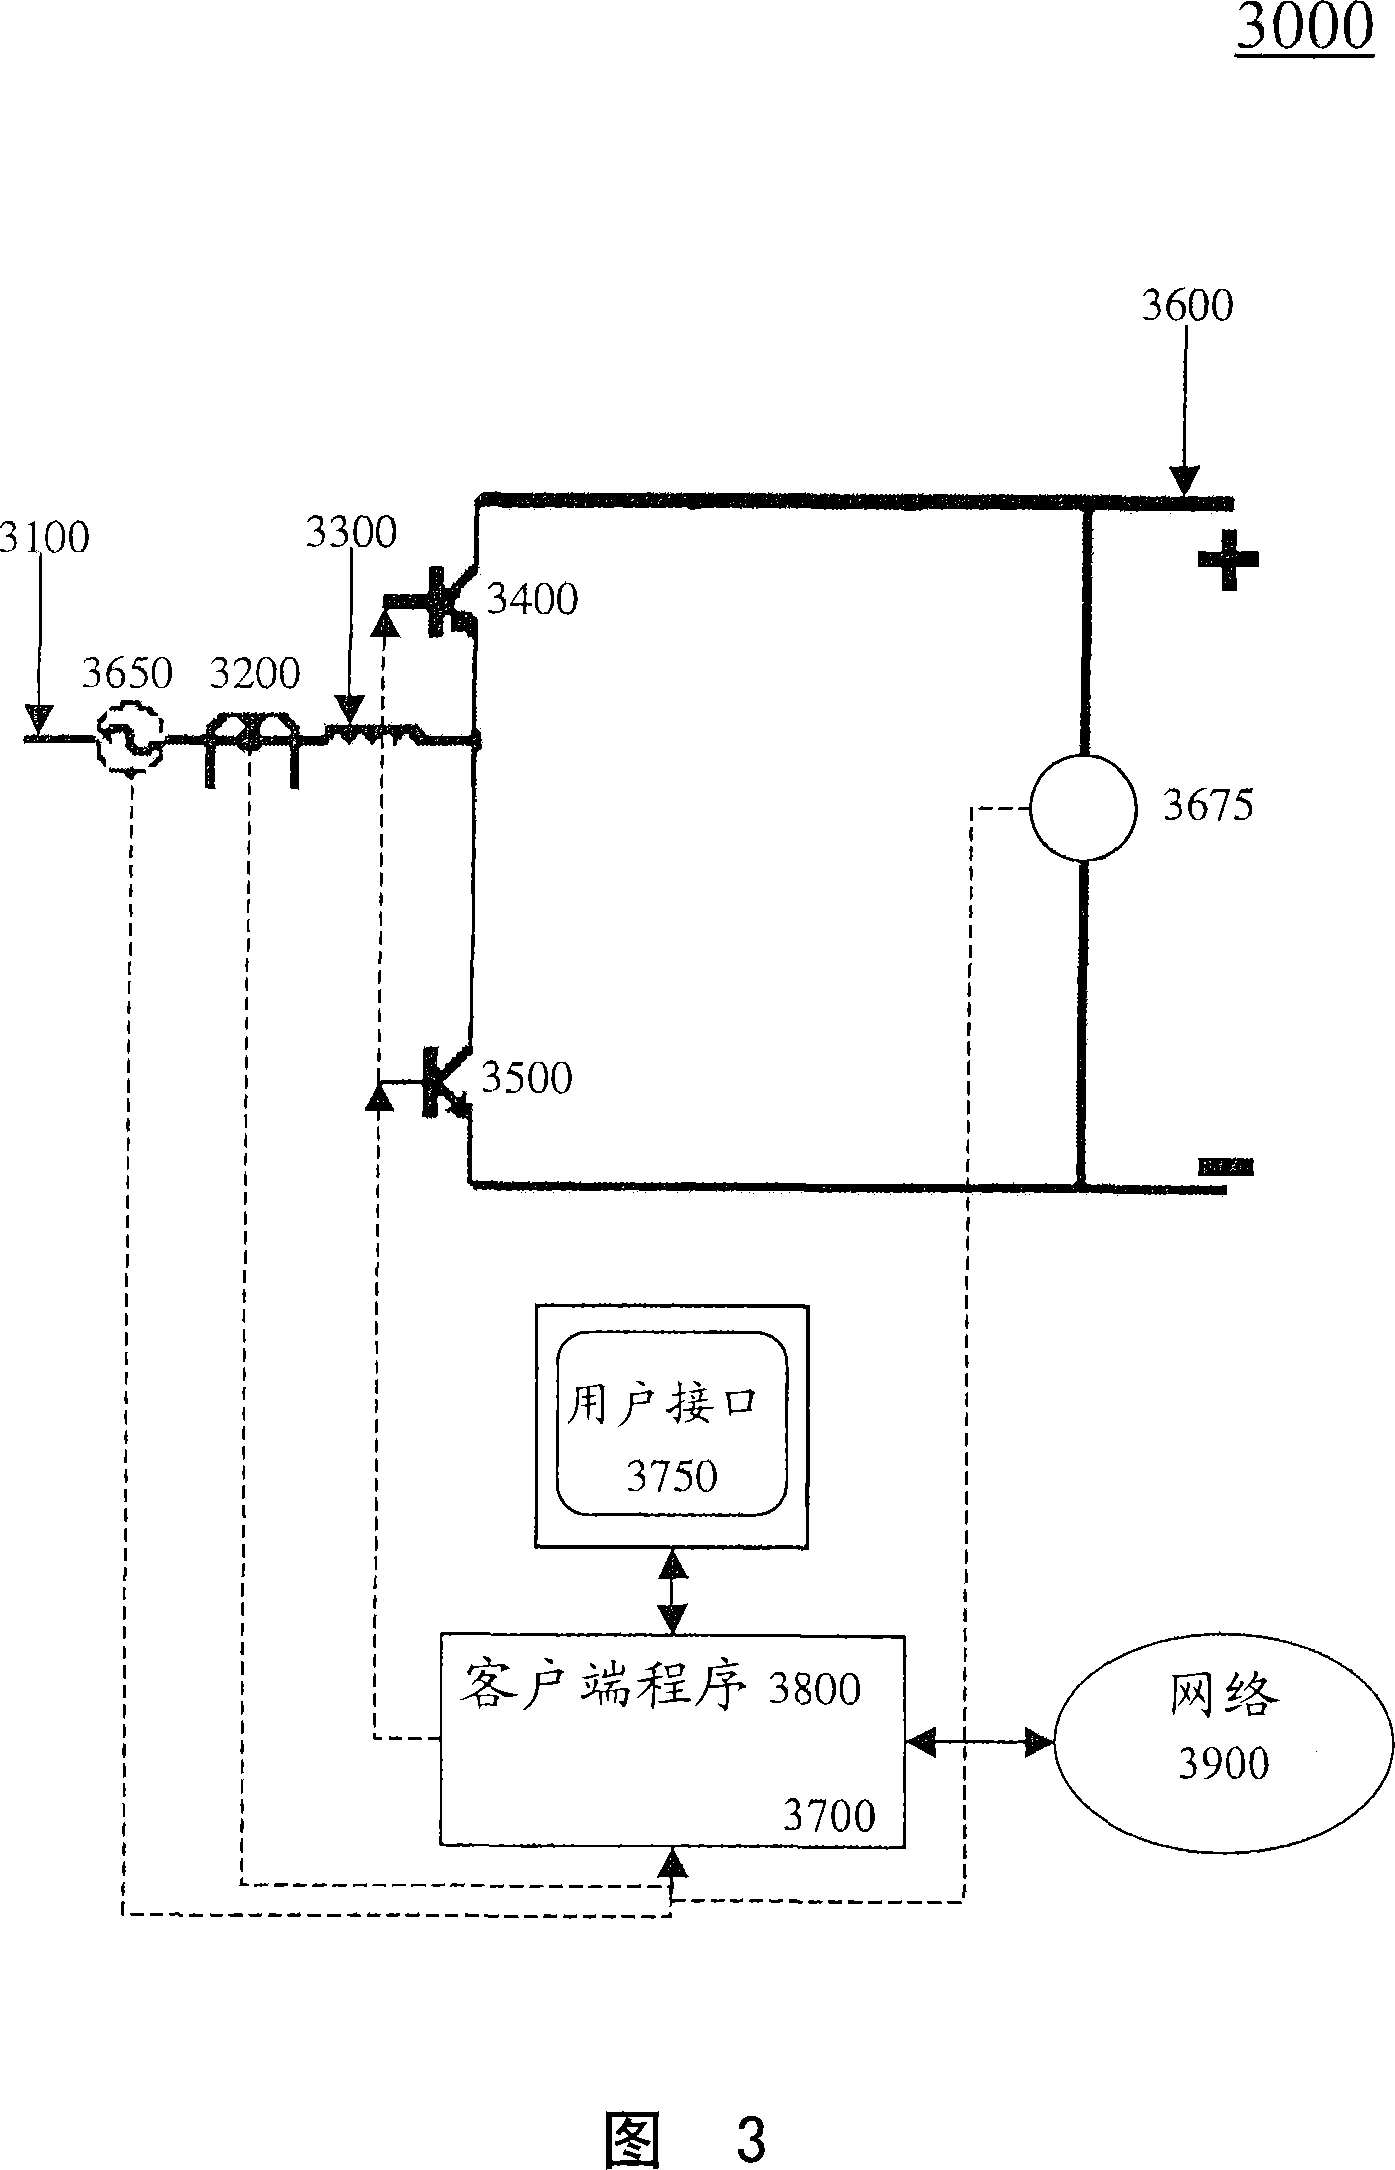 Systems for managing electrical power